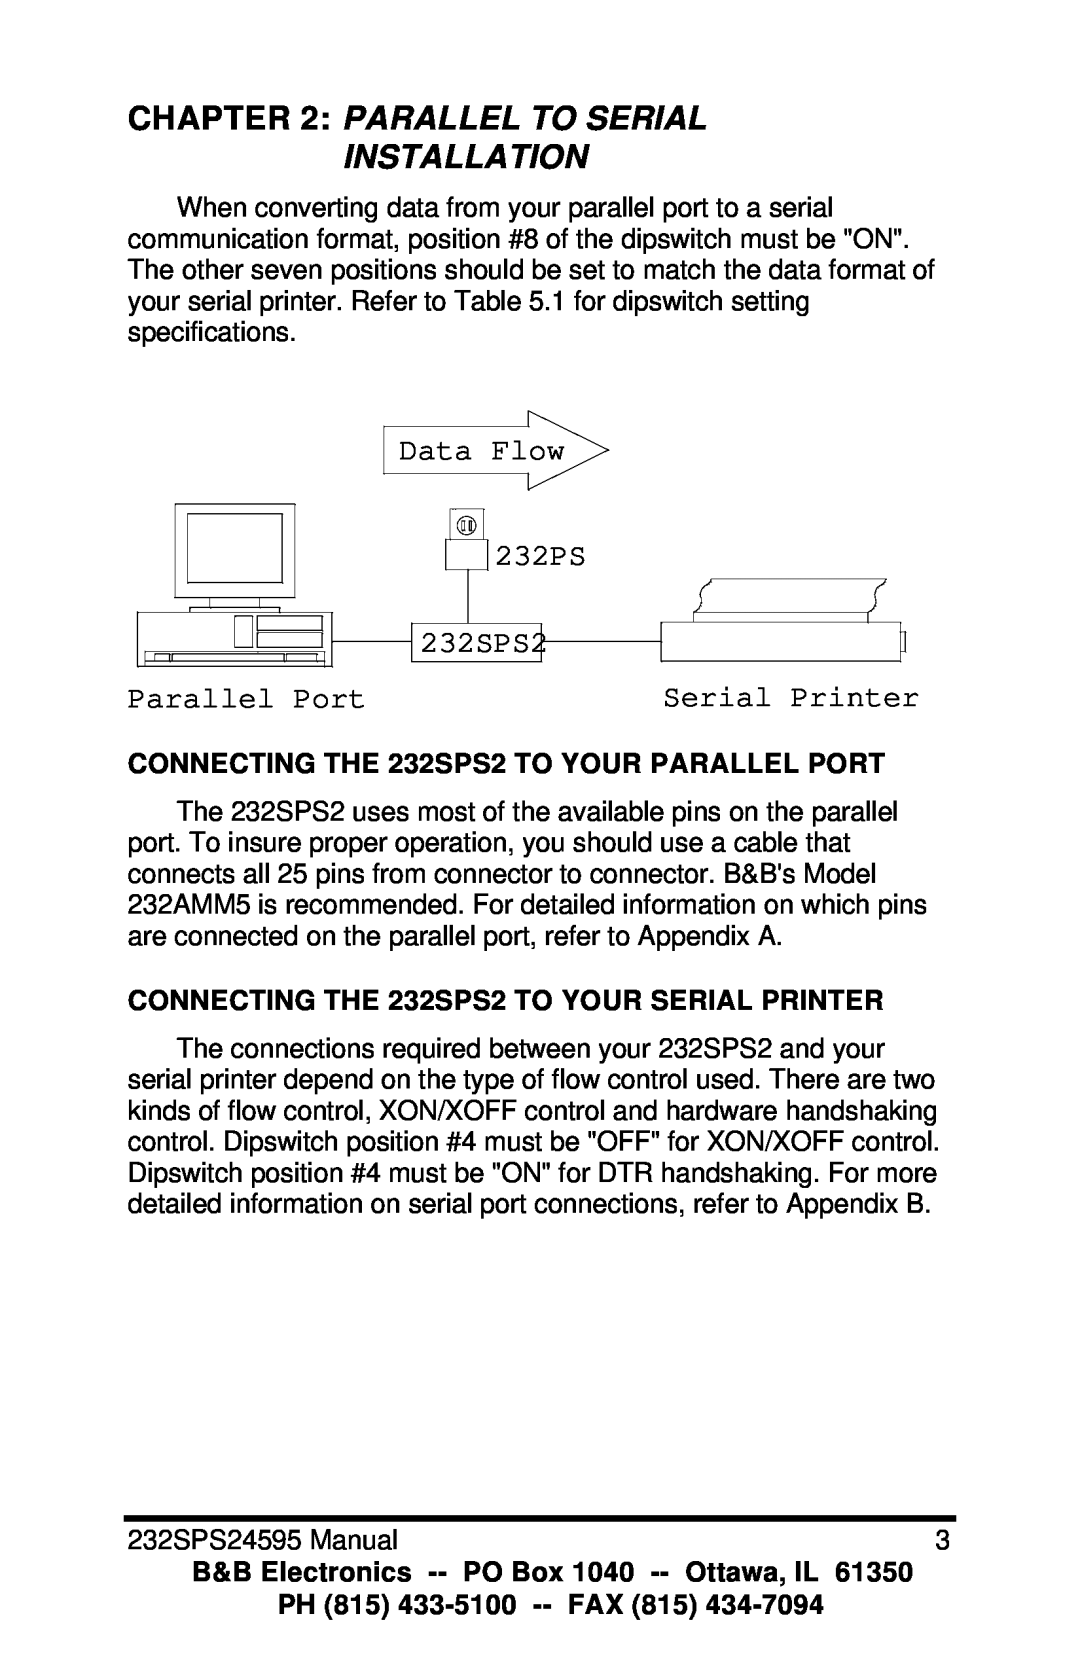 B&B Electronics Parallel to Serial and Serial to Parallel Converter manual Parallel To Serial Installation, Parallel Port 